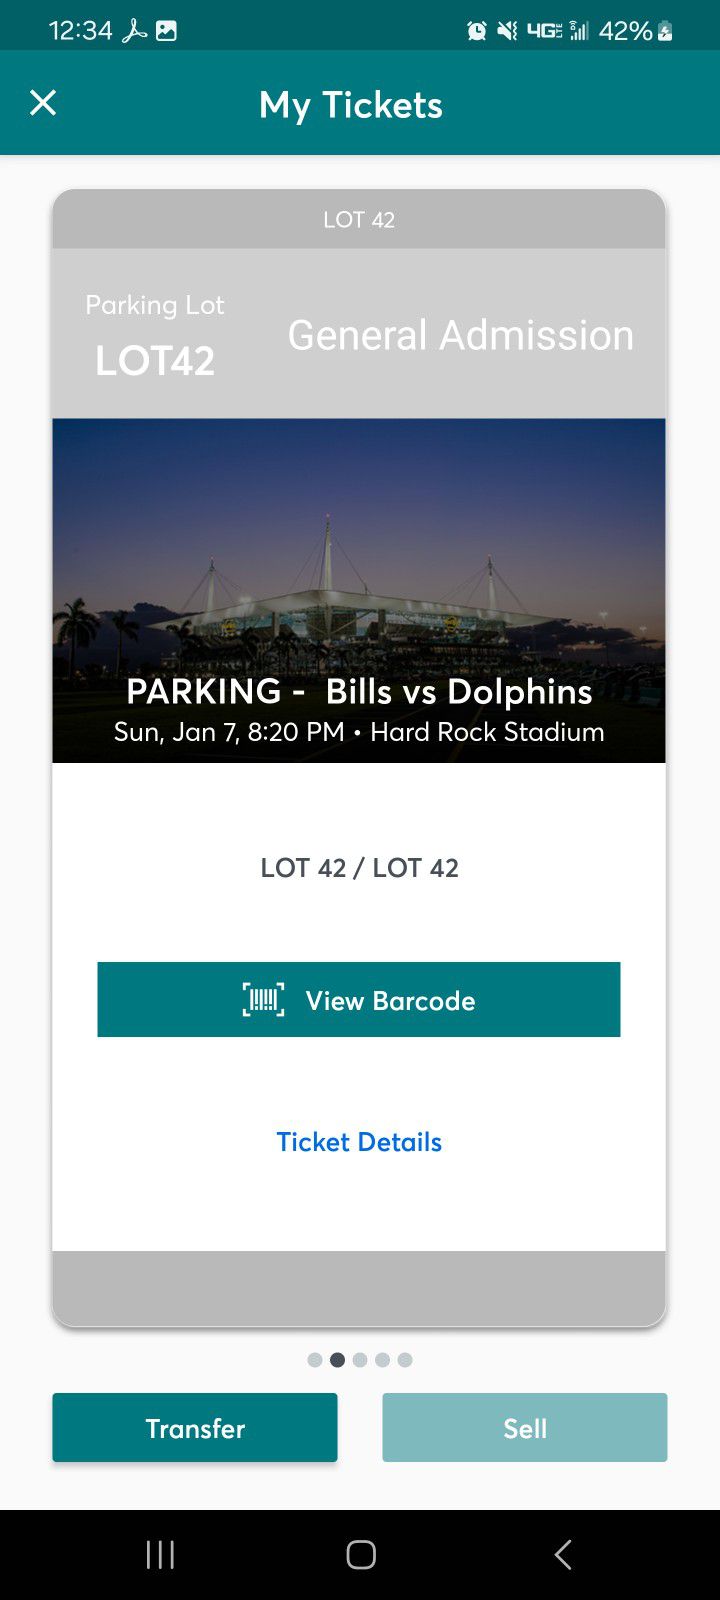 Parking PASS MIAMI DOLPHINS 1/7